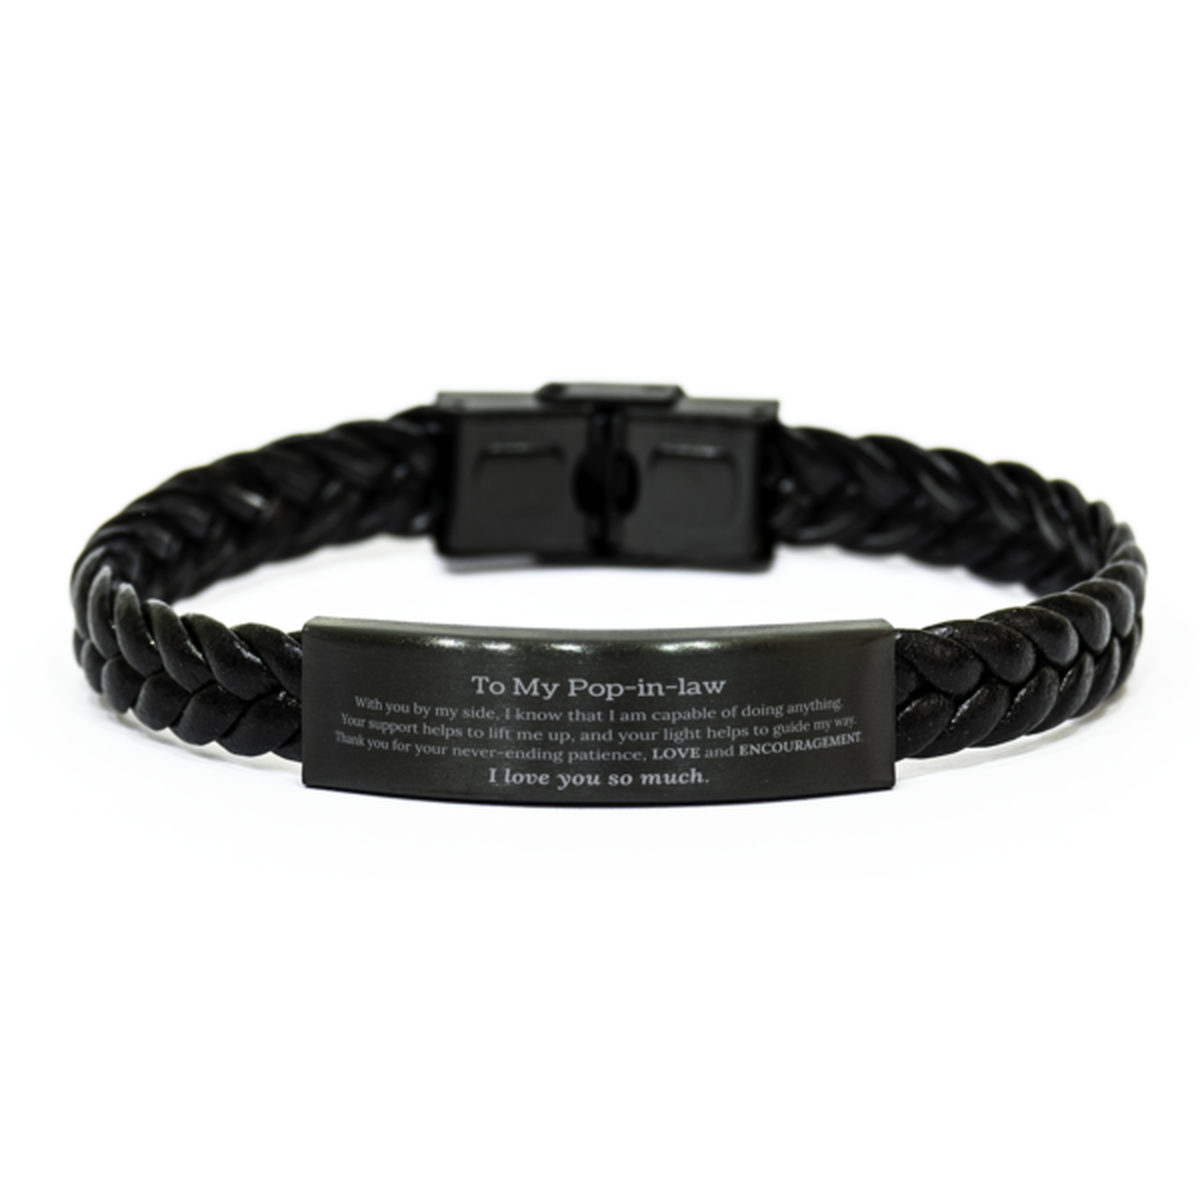 Appreciation Pop-in-law Braided Leather Bracelet Gifts, To My Pop-in-law Birthday Christmas Wedding Keepsake Gifts for Pop-in-law With you by my side, I know that I am capable of doing anything. I love you so much